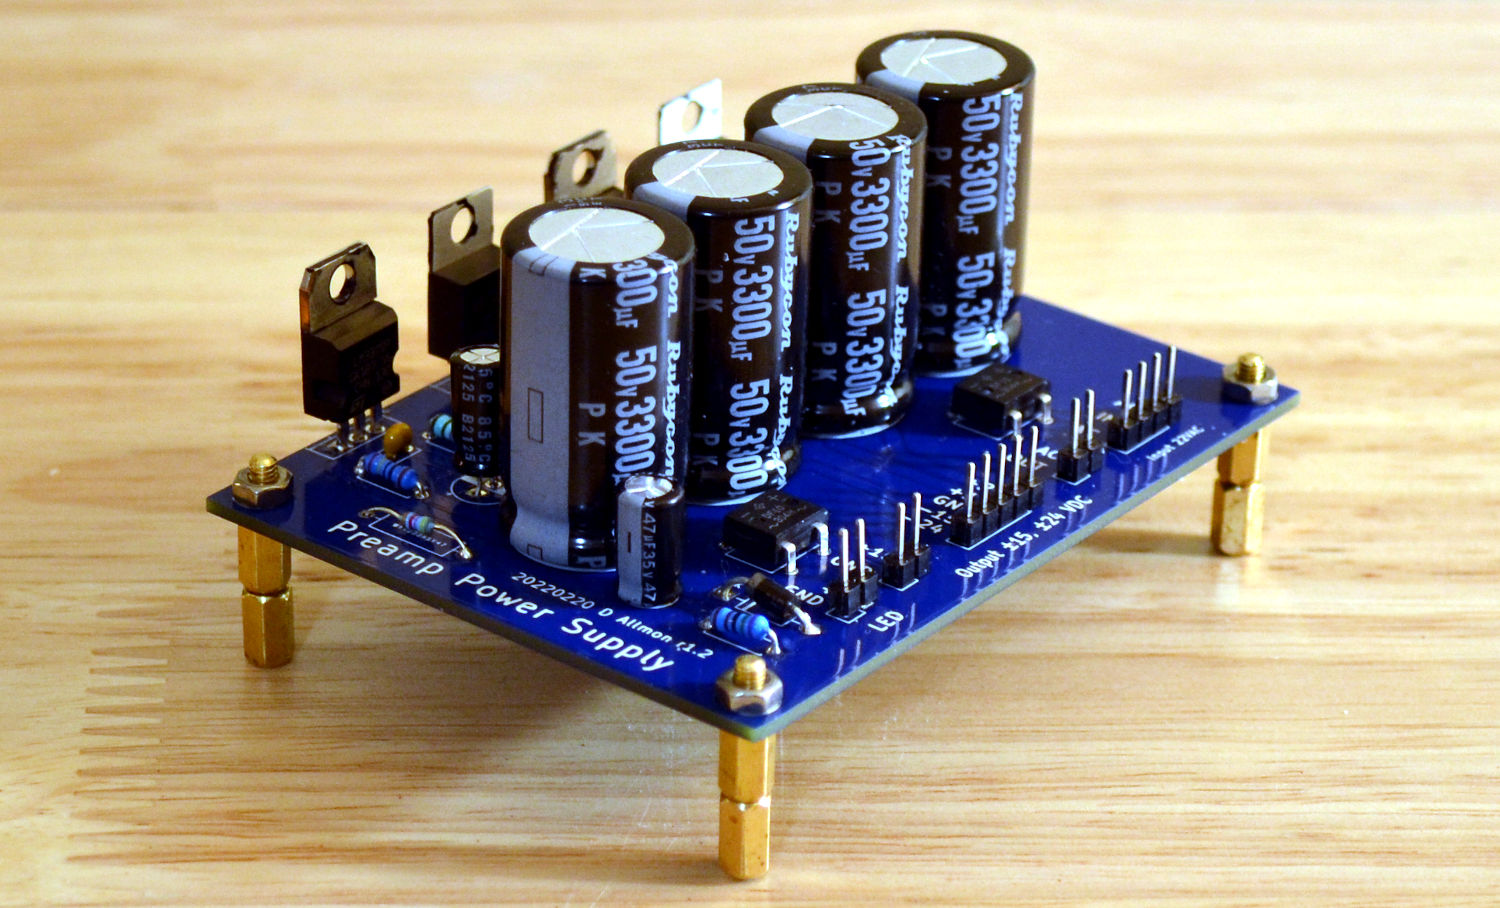 Power supply board assembled